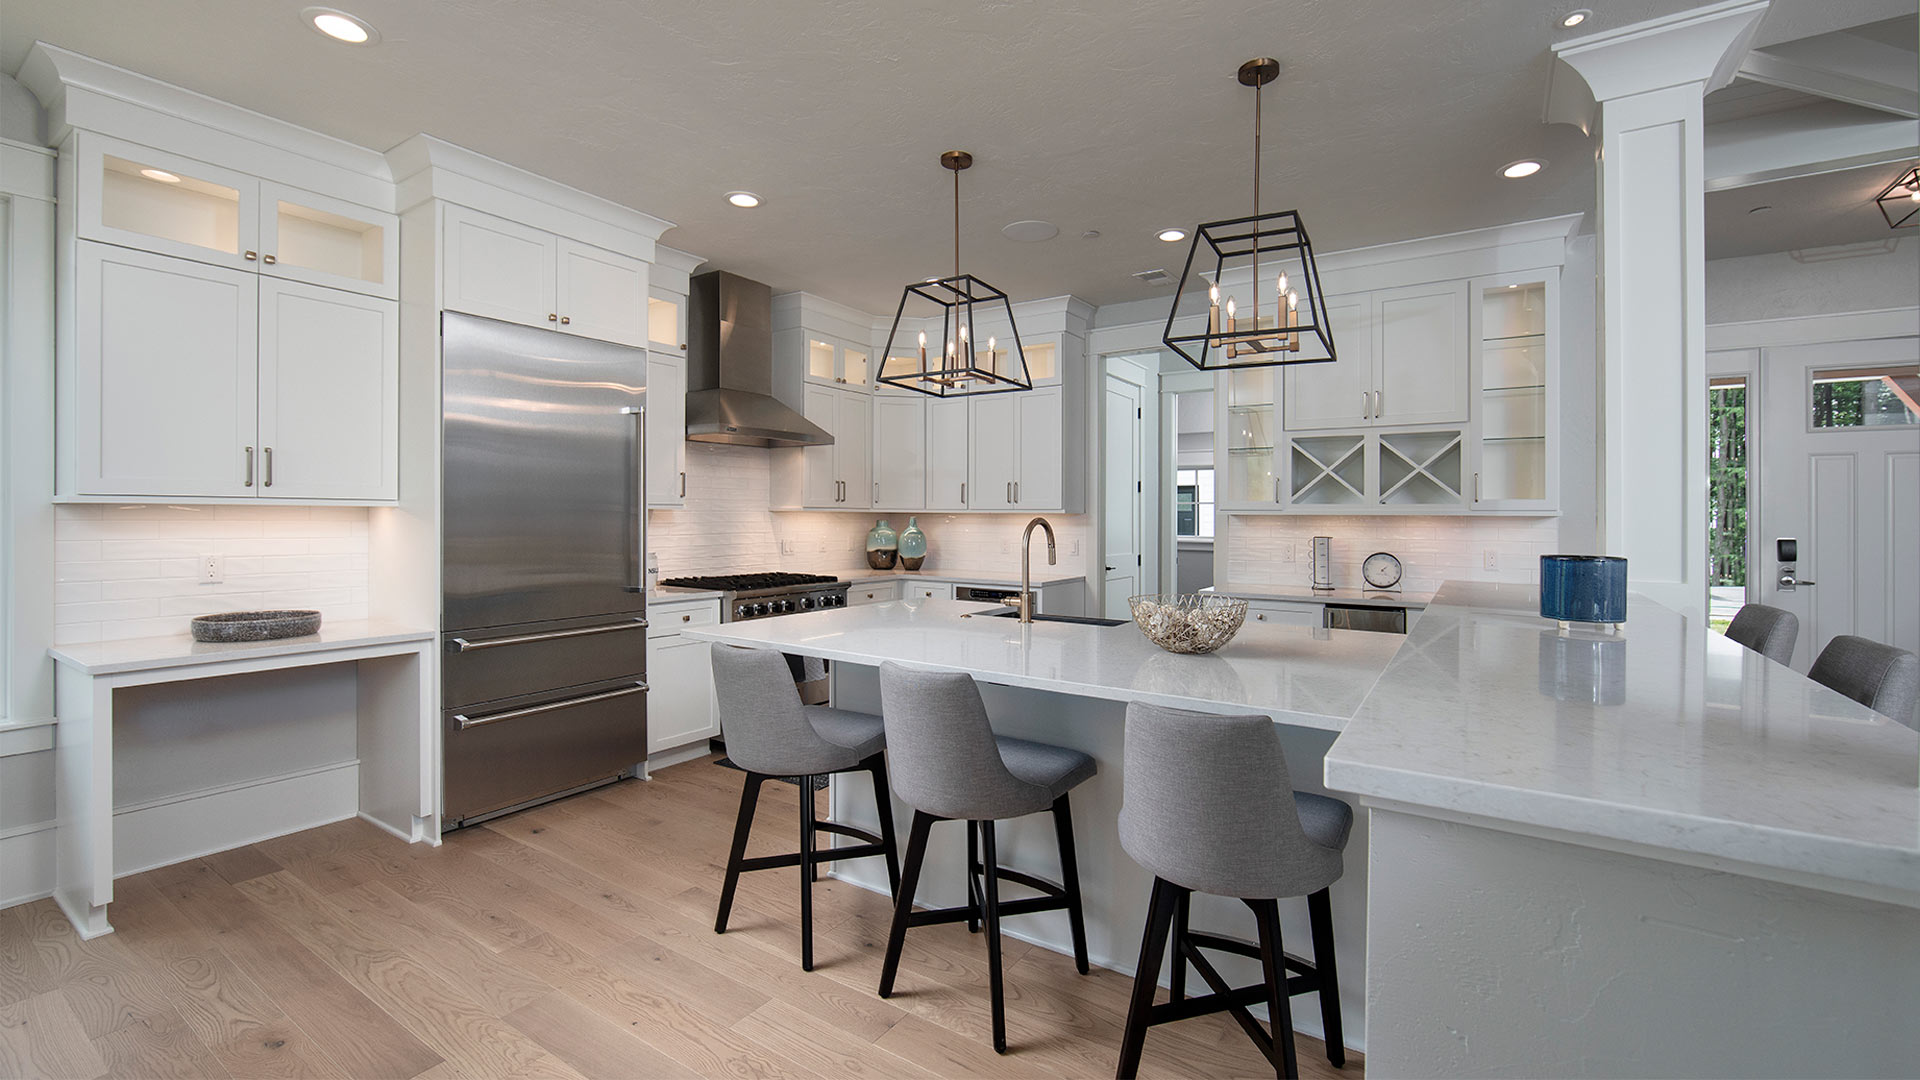 interior shot of a kitchen. The countertops and cabinets are a sleek white. There are gray chairs lining the kitchen island. There are stainless steel appliances.